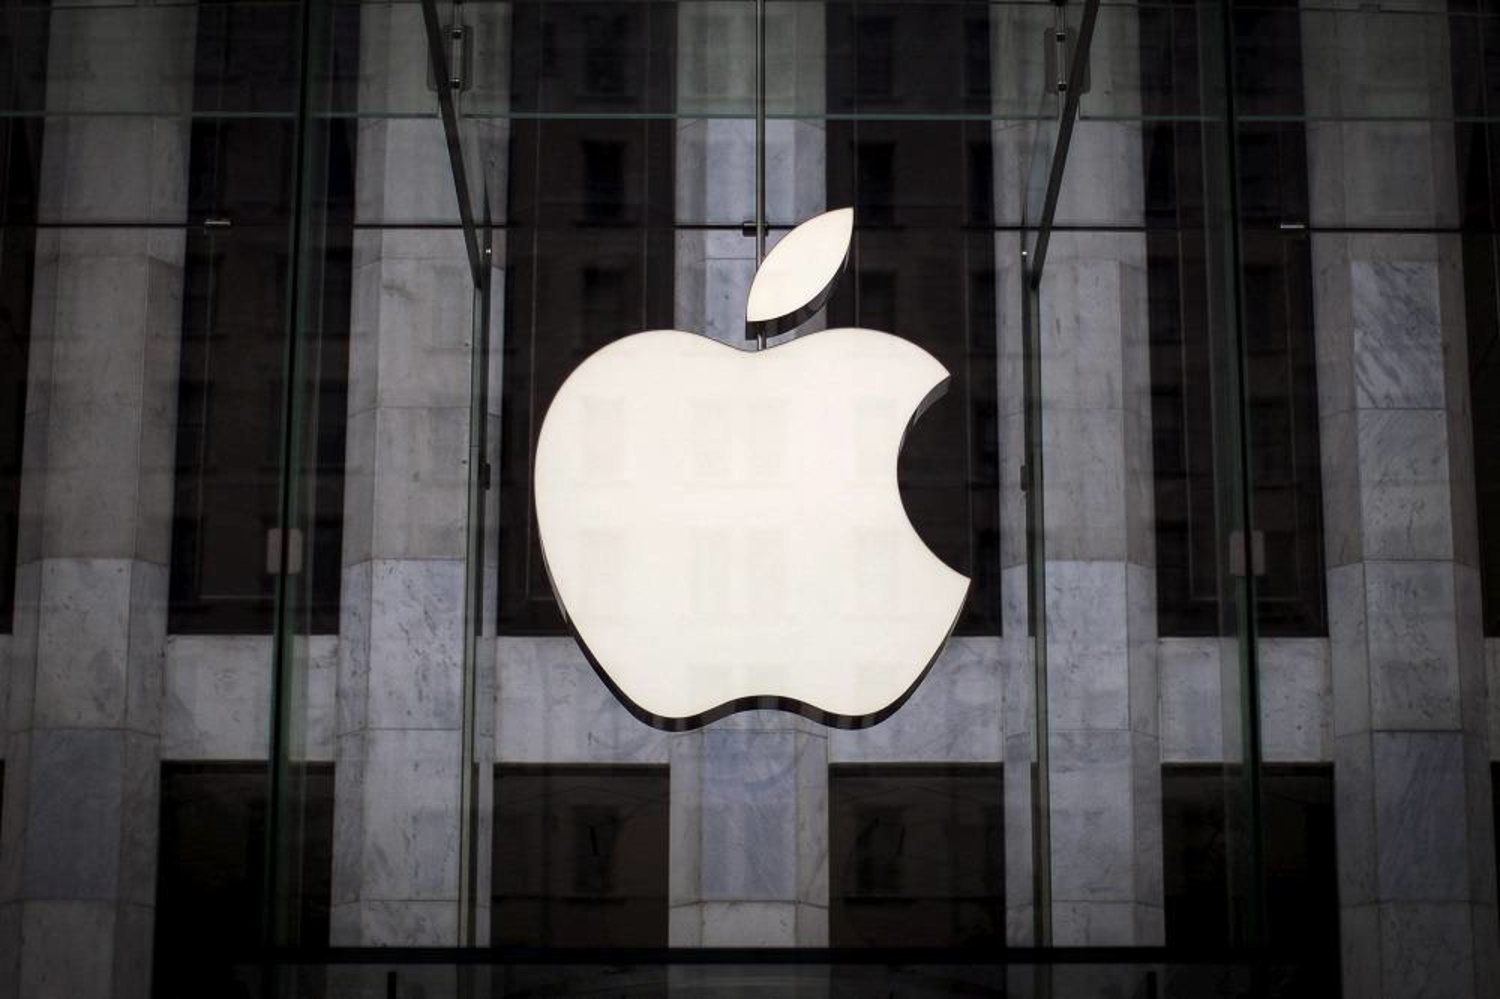 An Apple logo hangs above the entrance to the Apple store on 5th Avenue in the Manhattan borough of New York City, July 21, 2015. (Reuters)